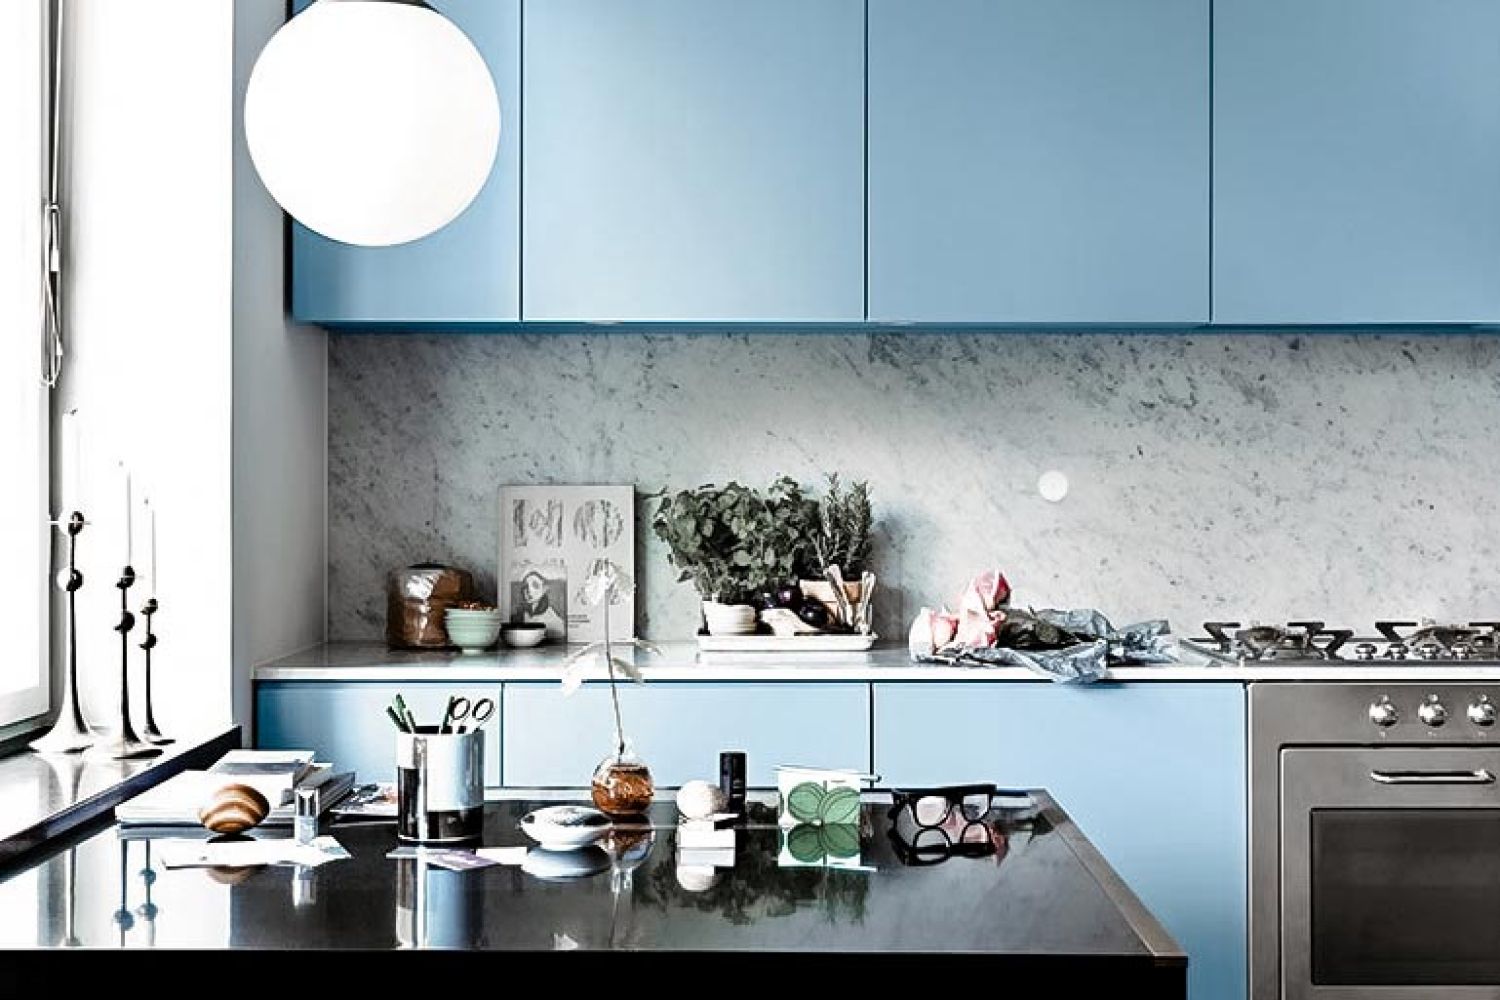 Modern kitchen with blue cabinets, marble backsplash with Josh.ai Nano, and various kitchen items on the counter.